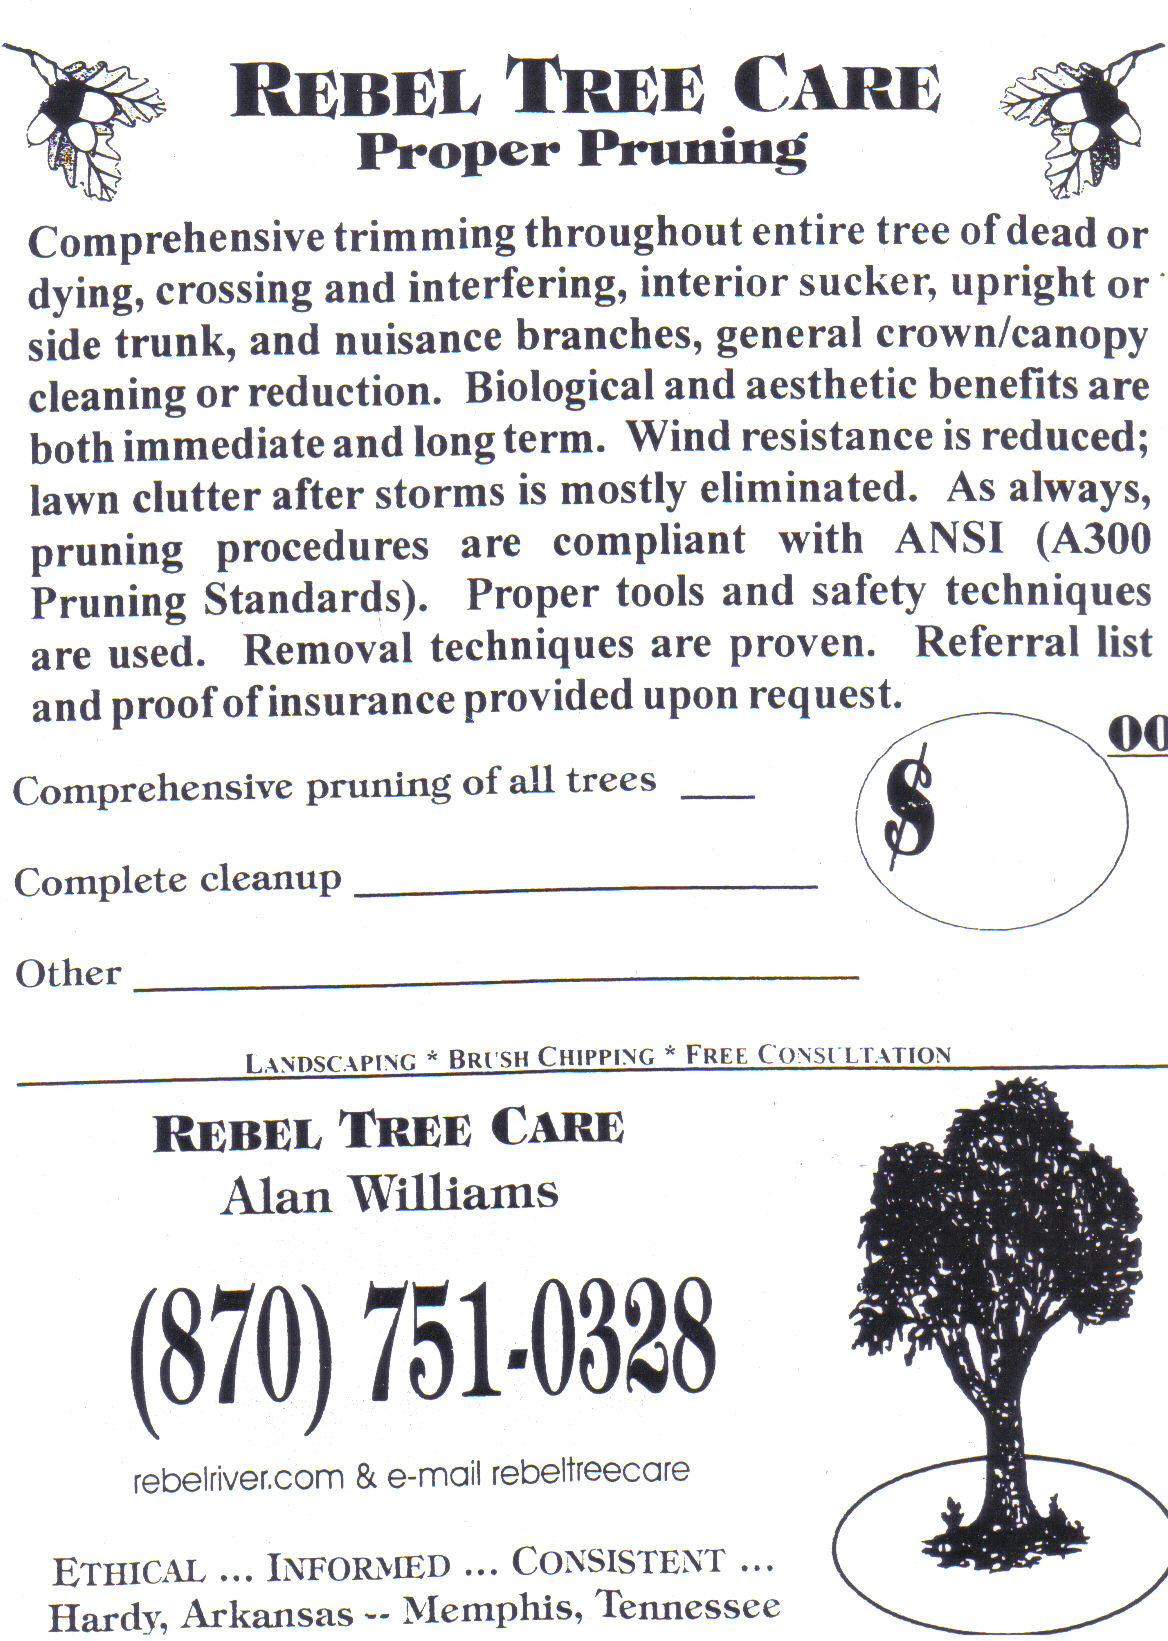 Rebel Tree Care--General Contract